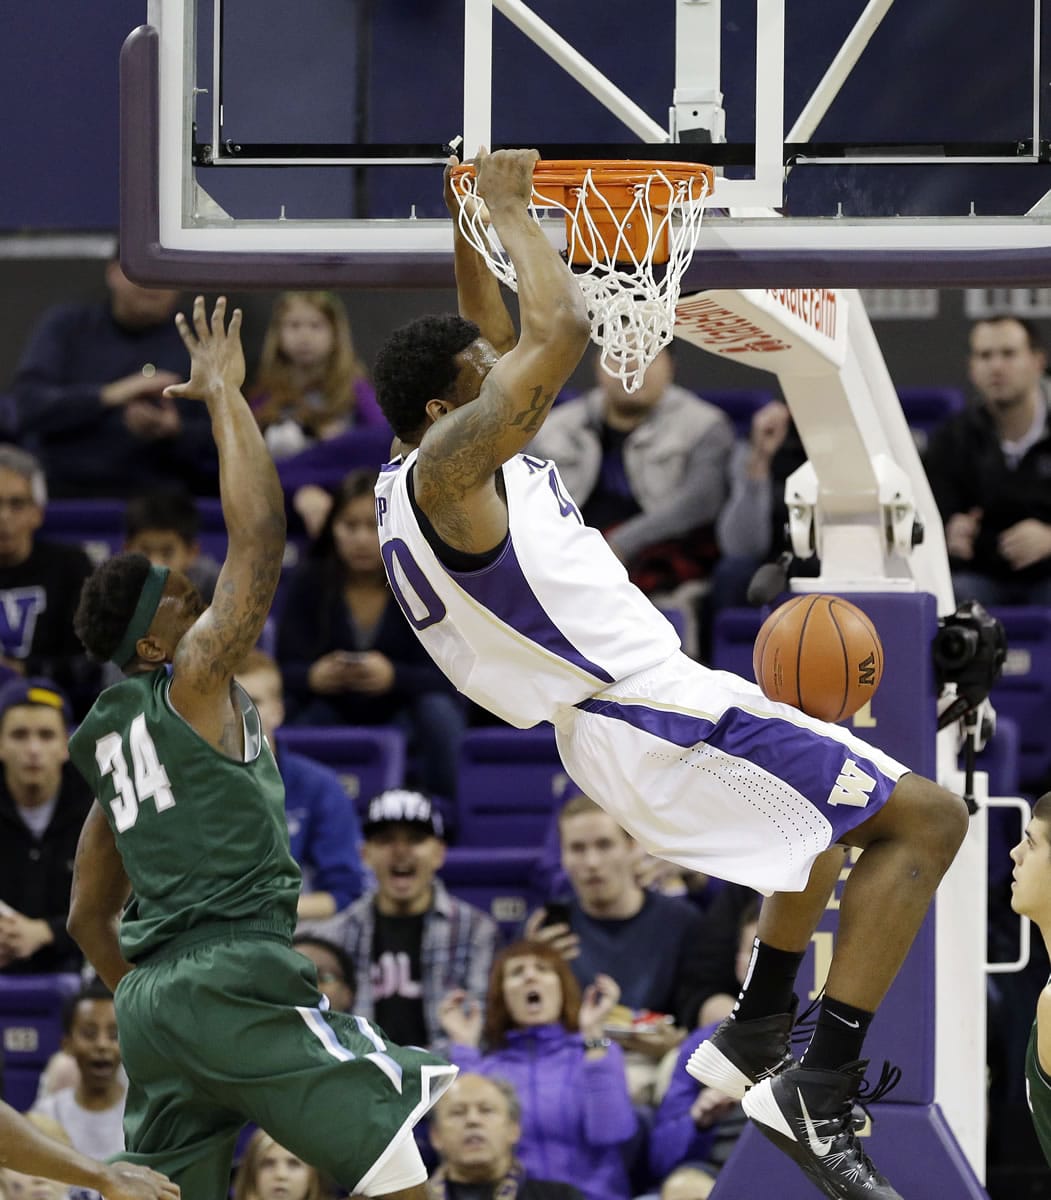 Washington's Shawn Kemp Jr., right, dunks in front of Tulane's Tre Drye during the first half Monday, Dec. 22, 2014, in Seattle.